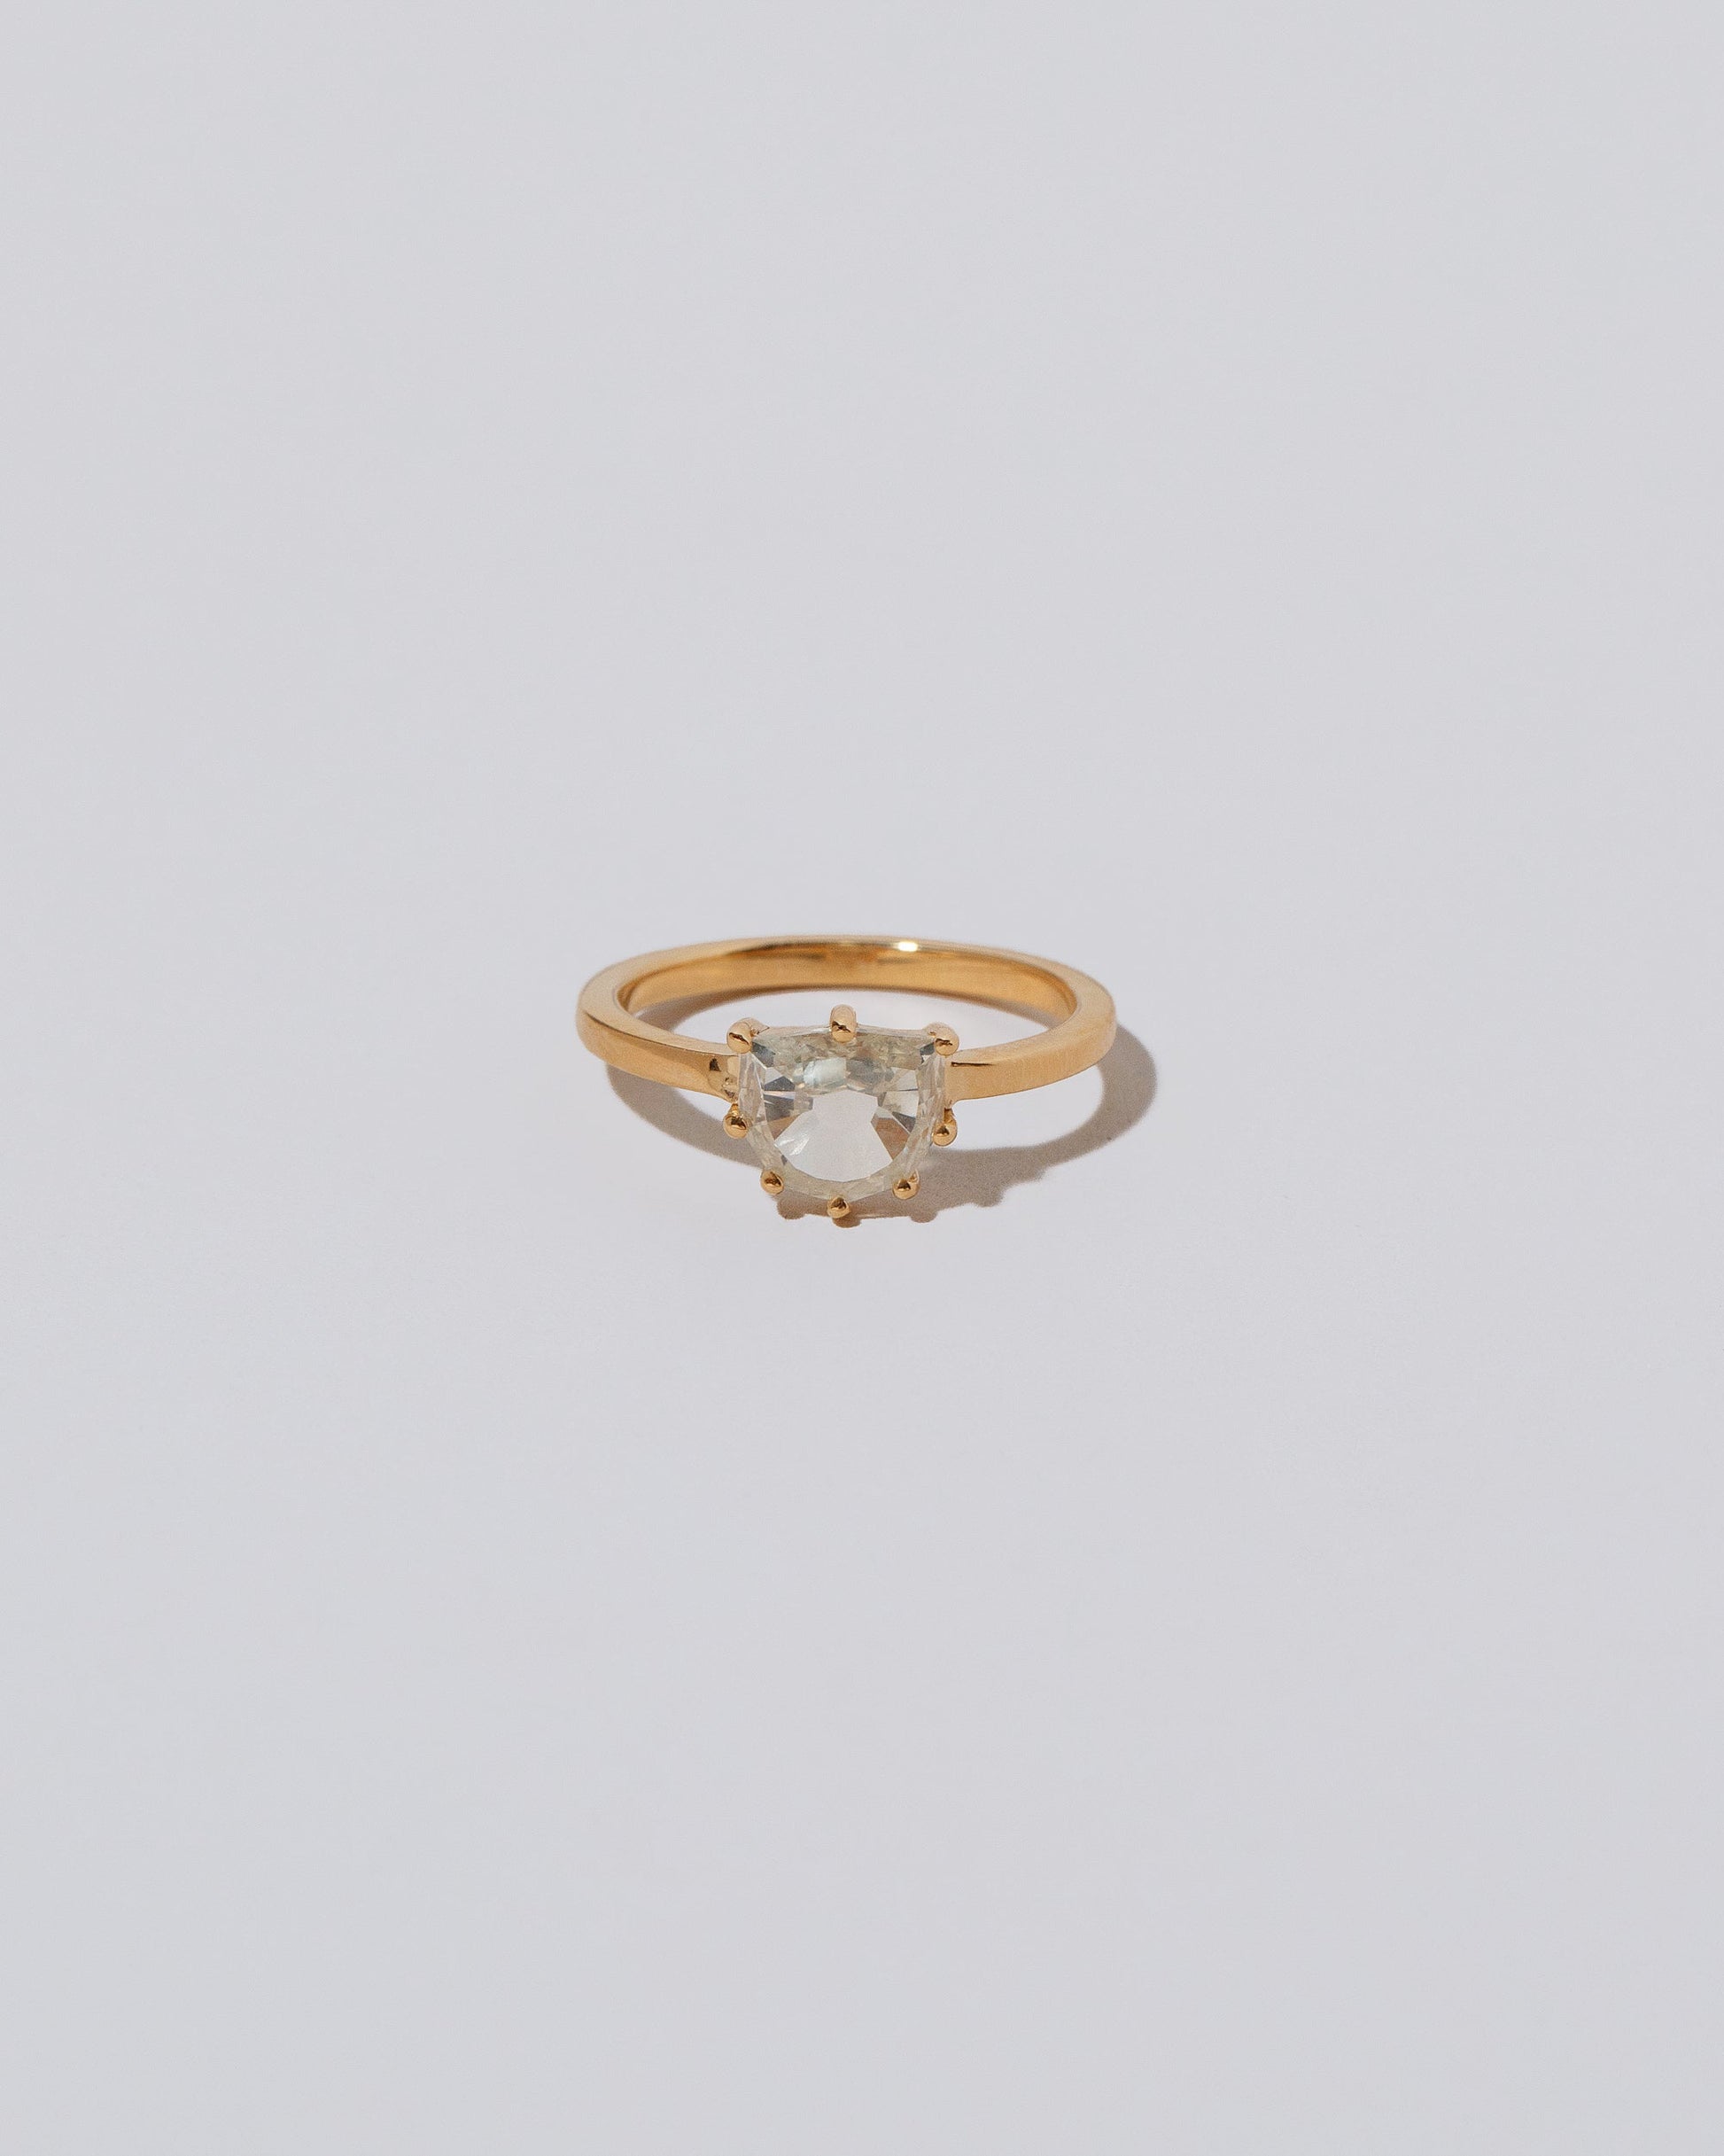 Product photo of the Coupe Ring on light color background